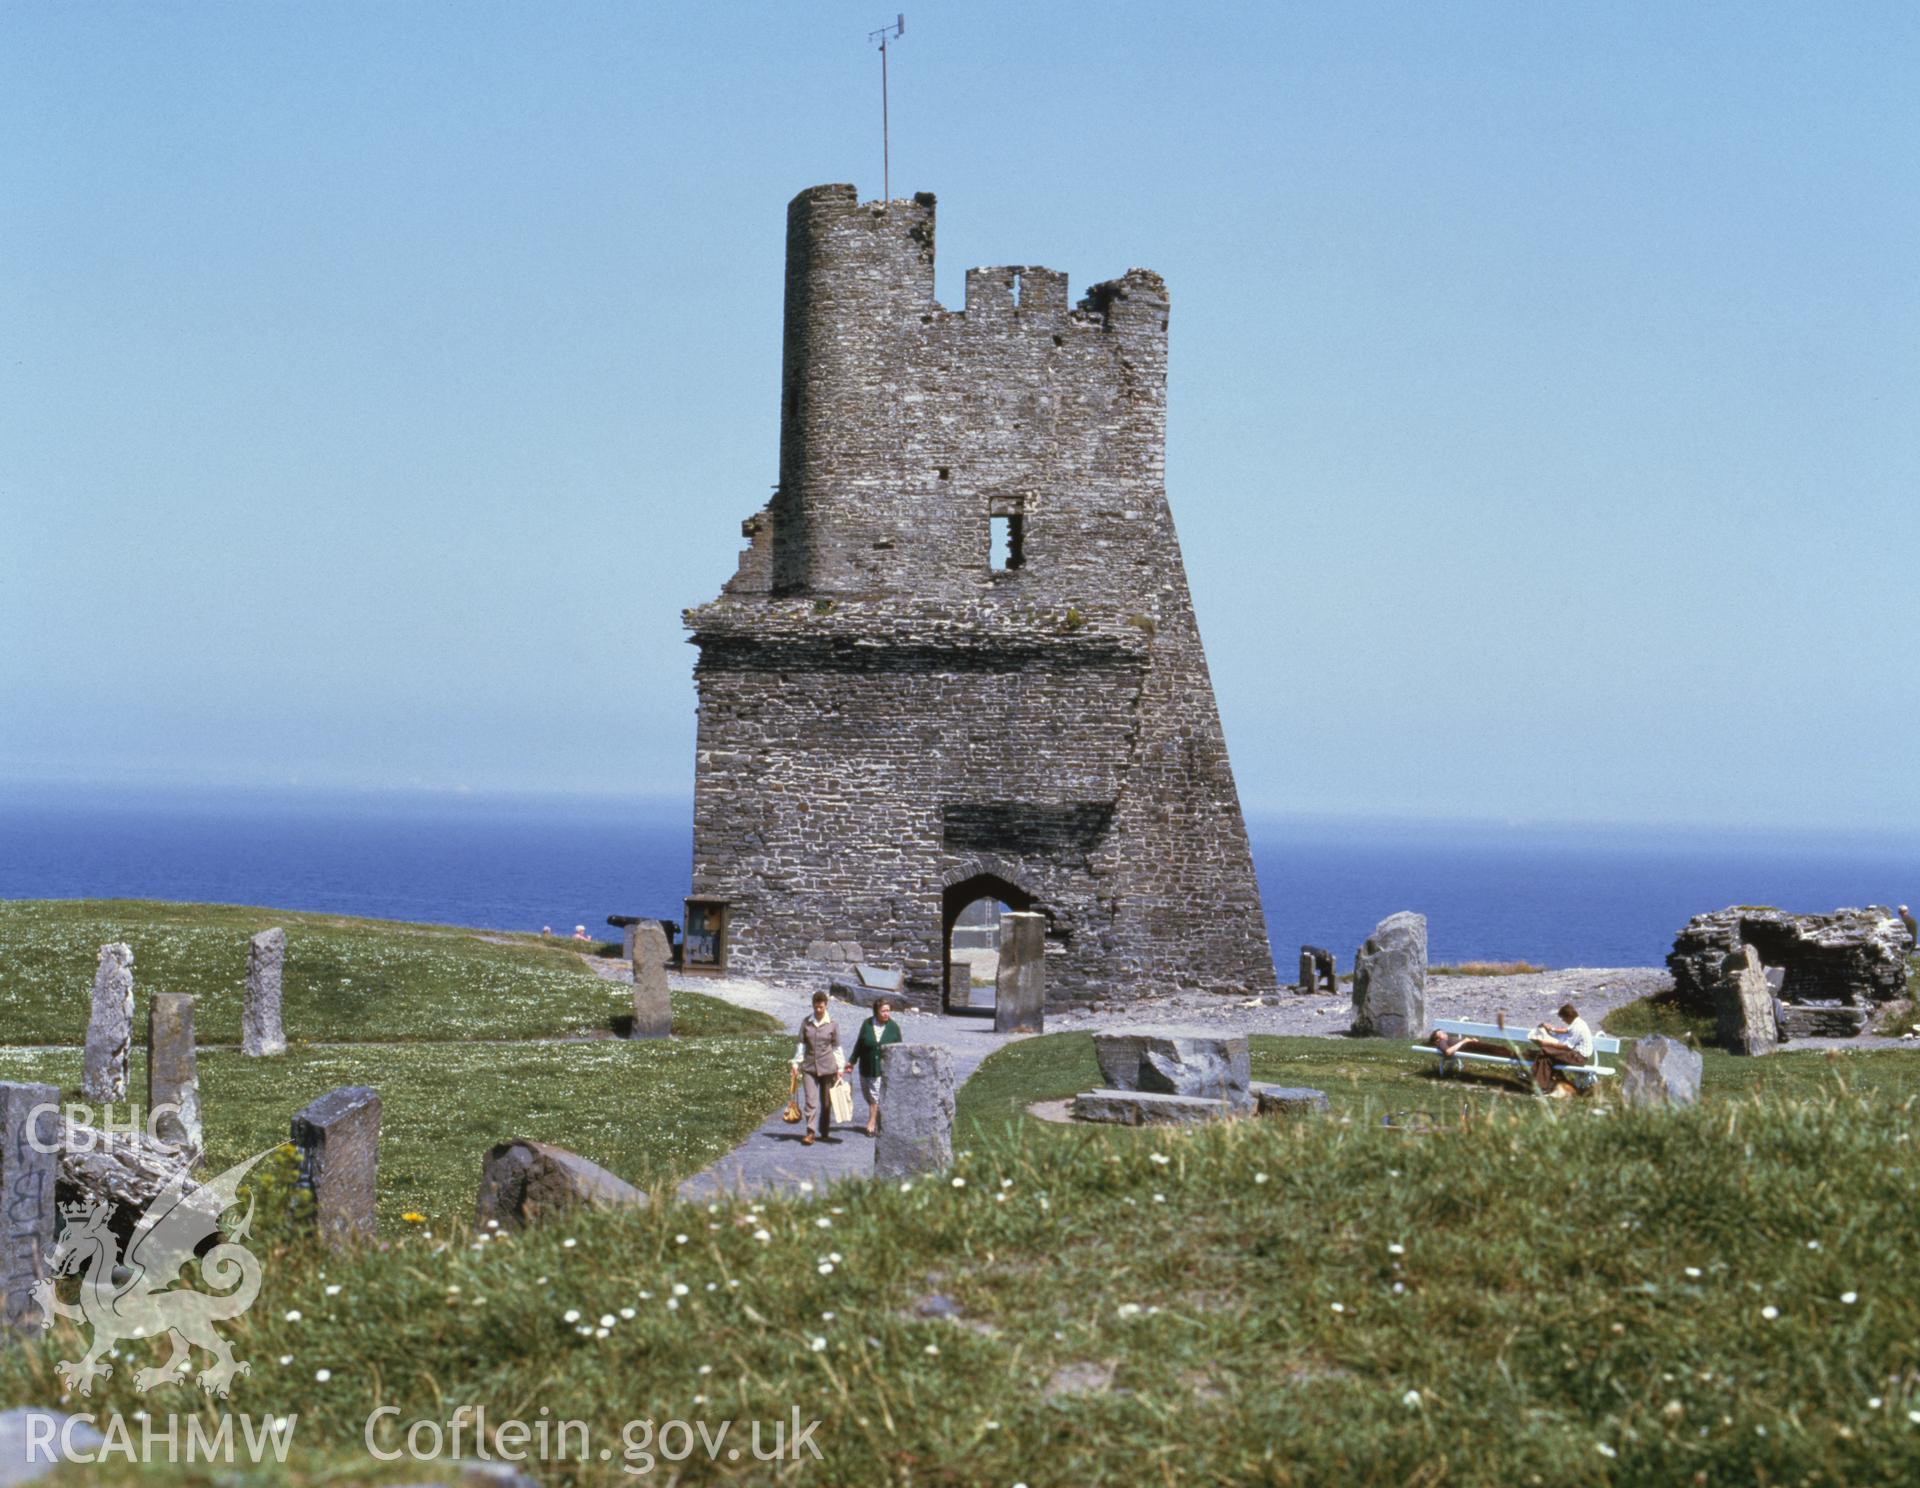 1 colour transparency showing view of Aberystwyth castle grounds with castle and sea in the background; collated by the former Central Office of Information.